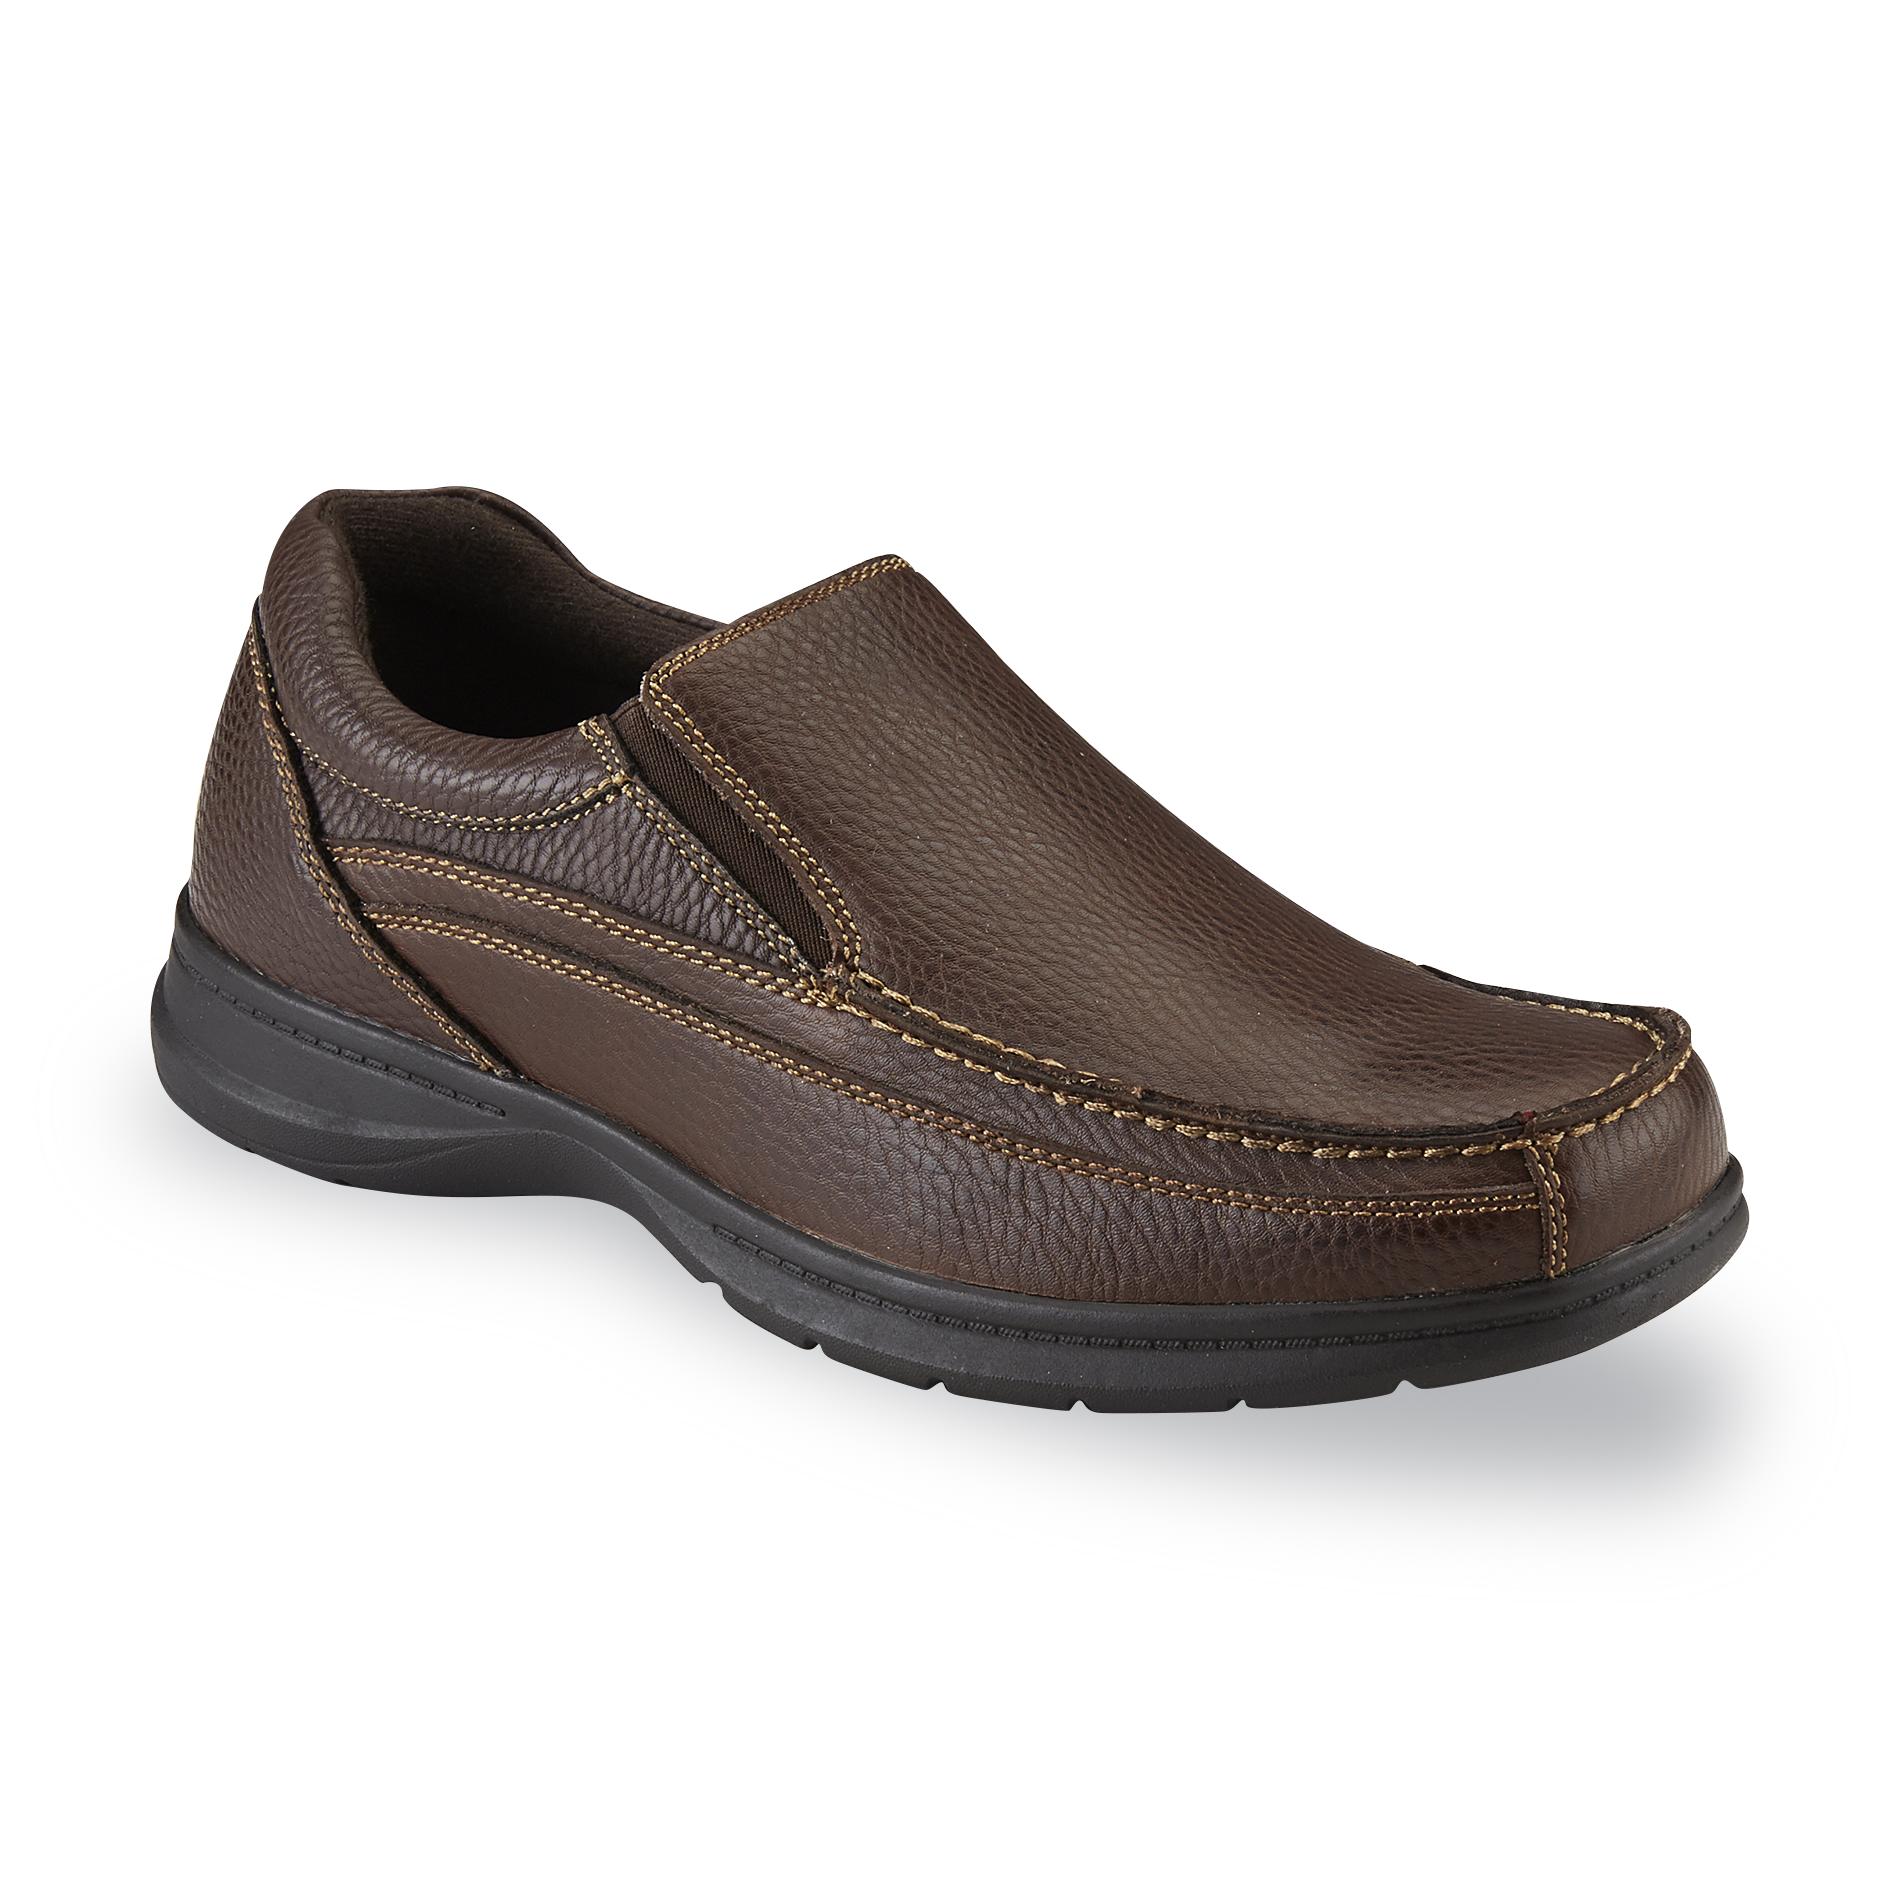 Dr. Scholl's Men's Bounce Leather Casual Loafer - Brown - Shoes - Men's ...